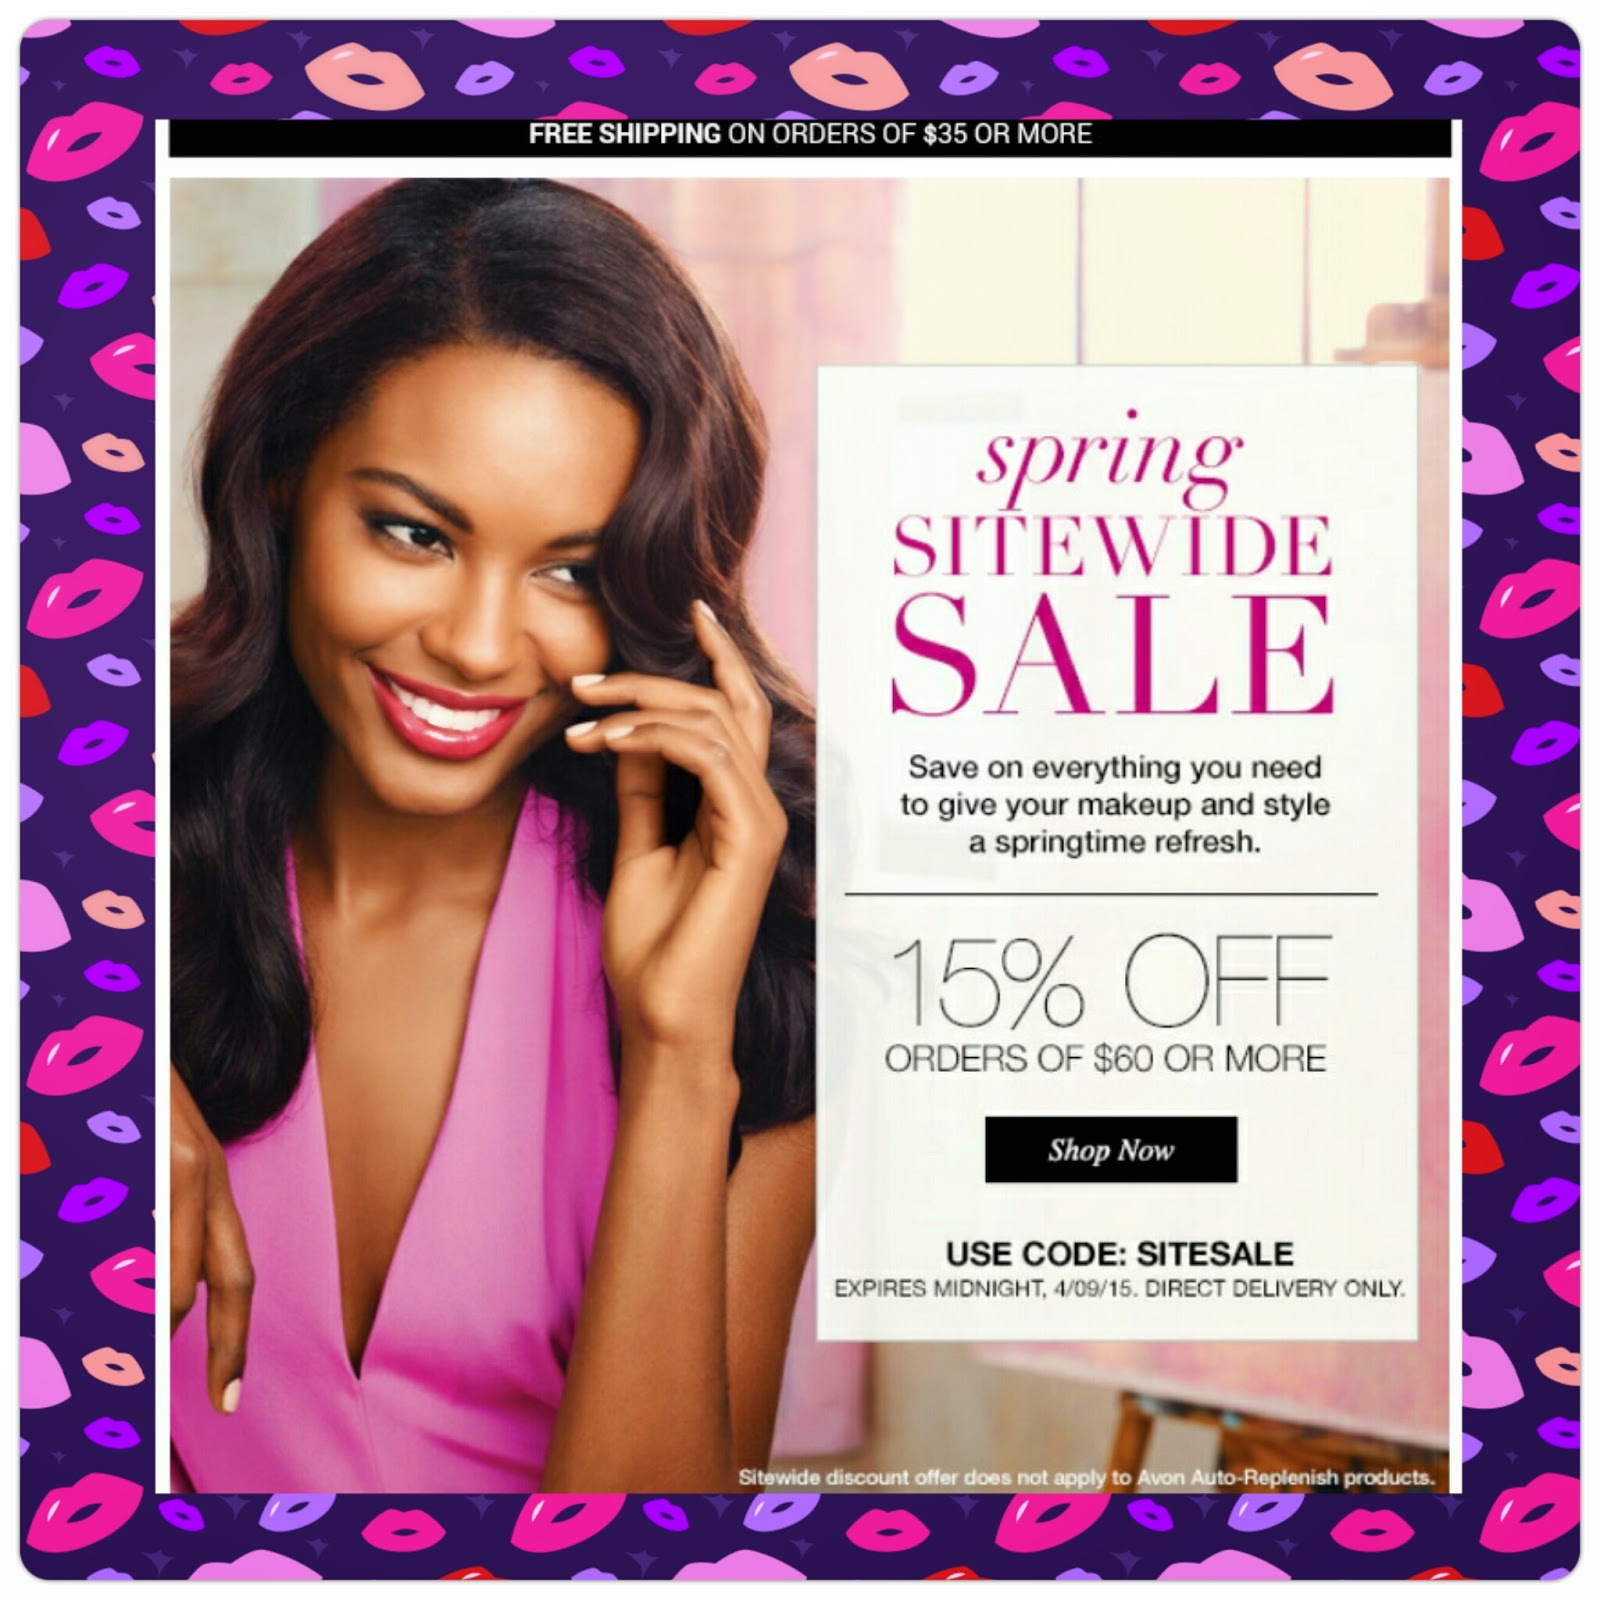 Jamie's Beauty Store: AVON Spring Sitewide Sale!